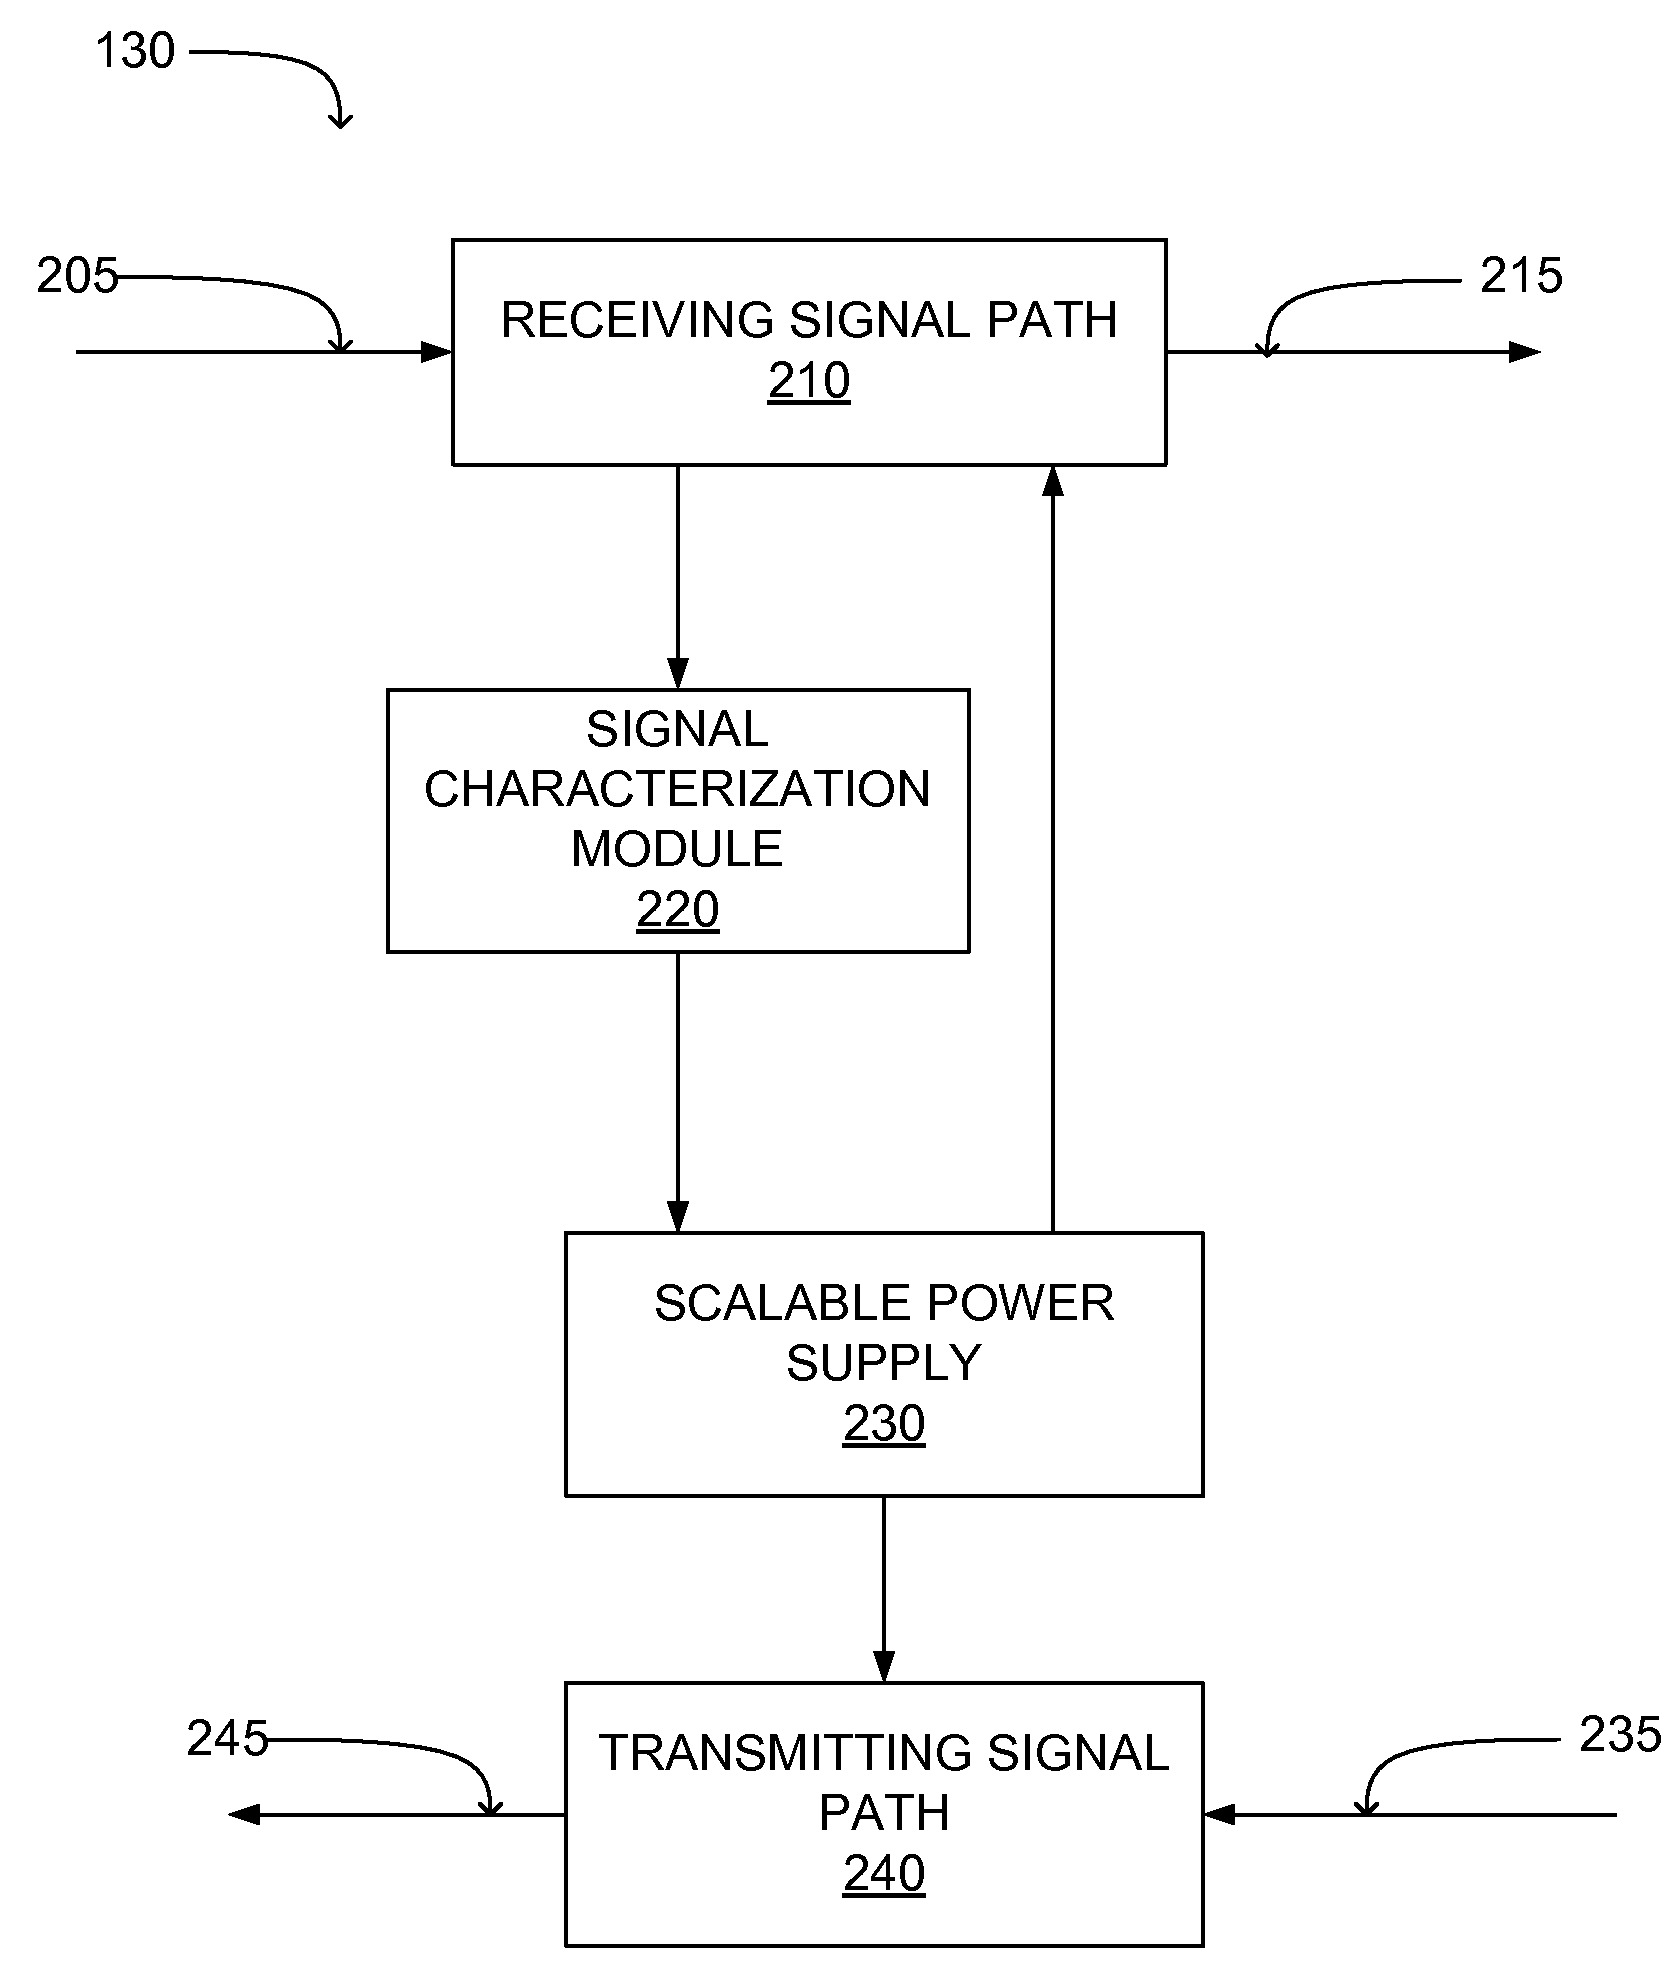 Adjusting power consumption of mobile communication devices based on received signal quality